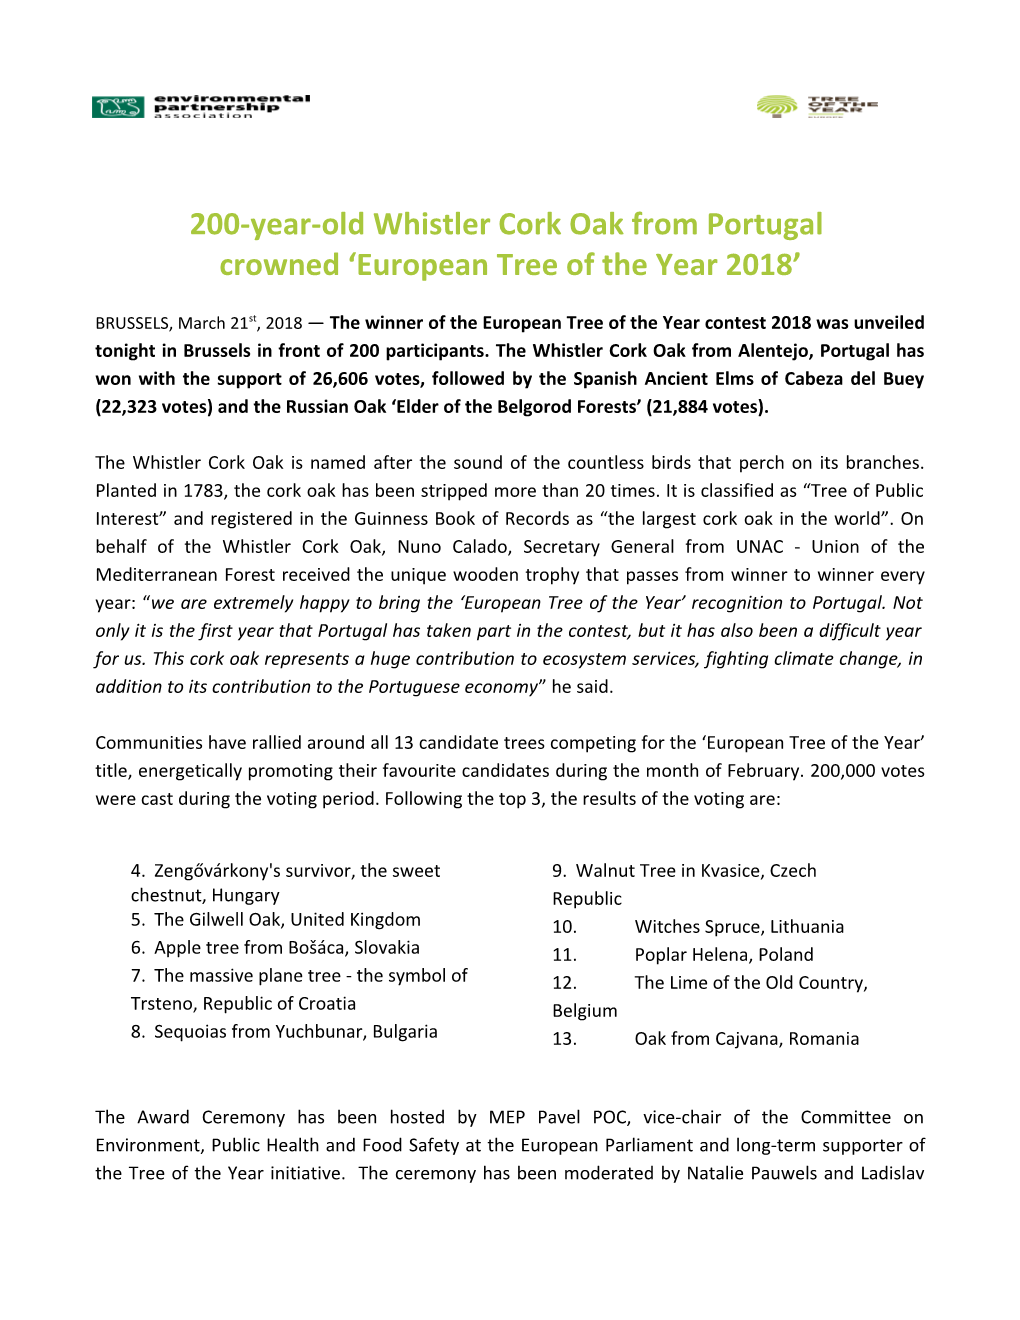 200-Year-Old Whistler Cork Oak from Portugal